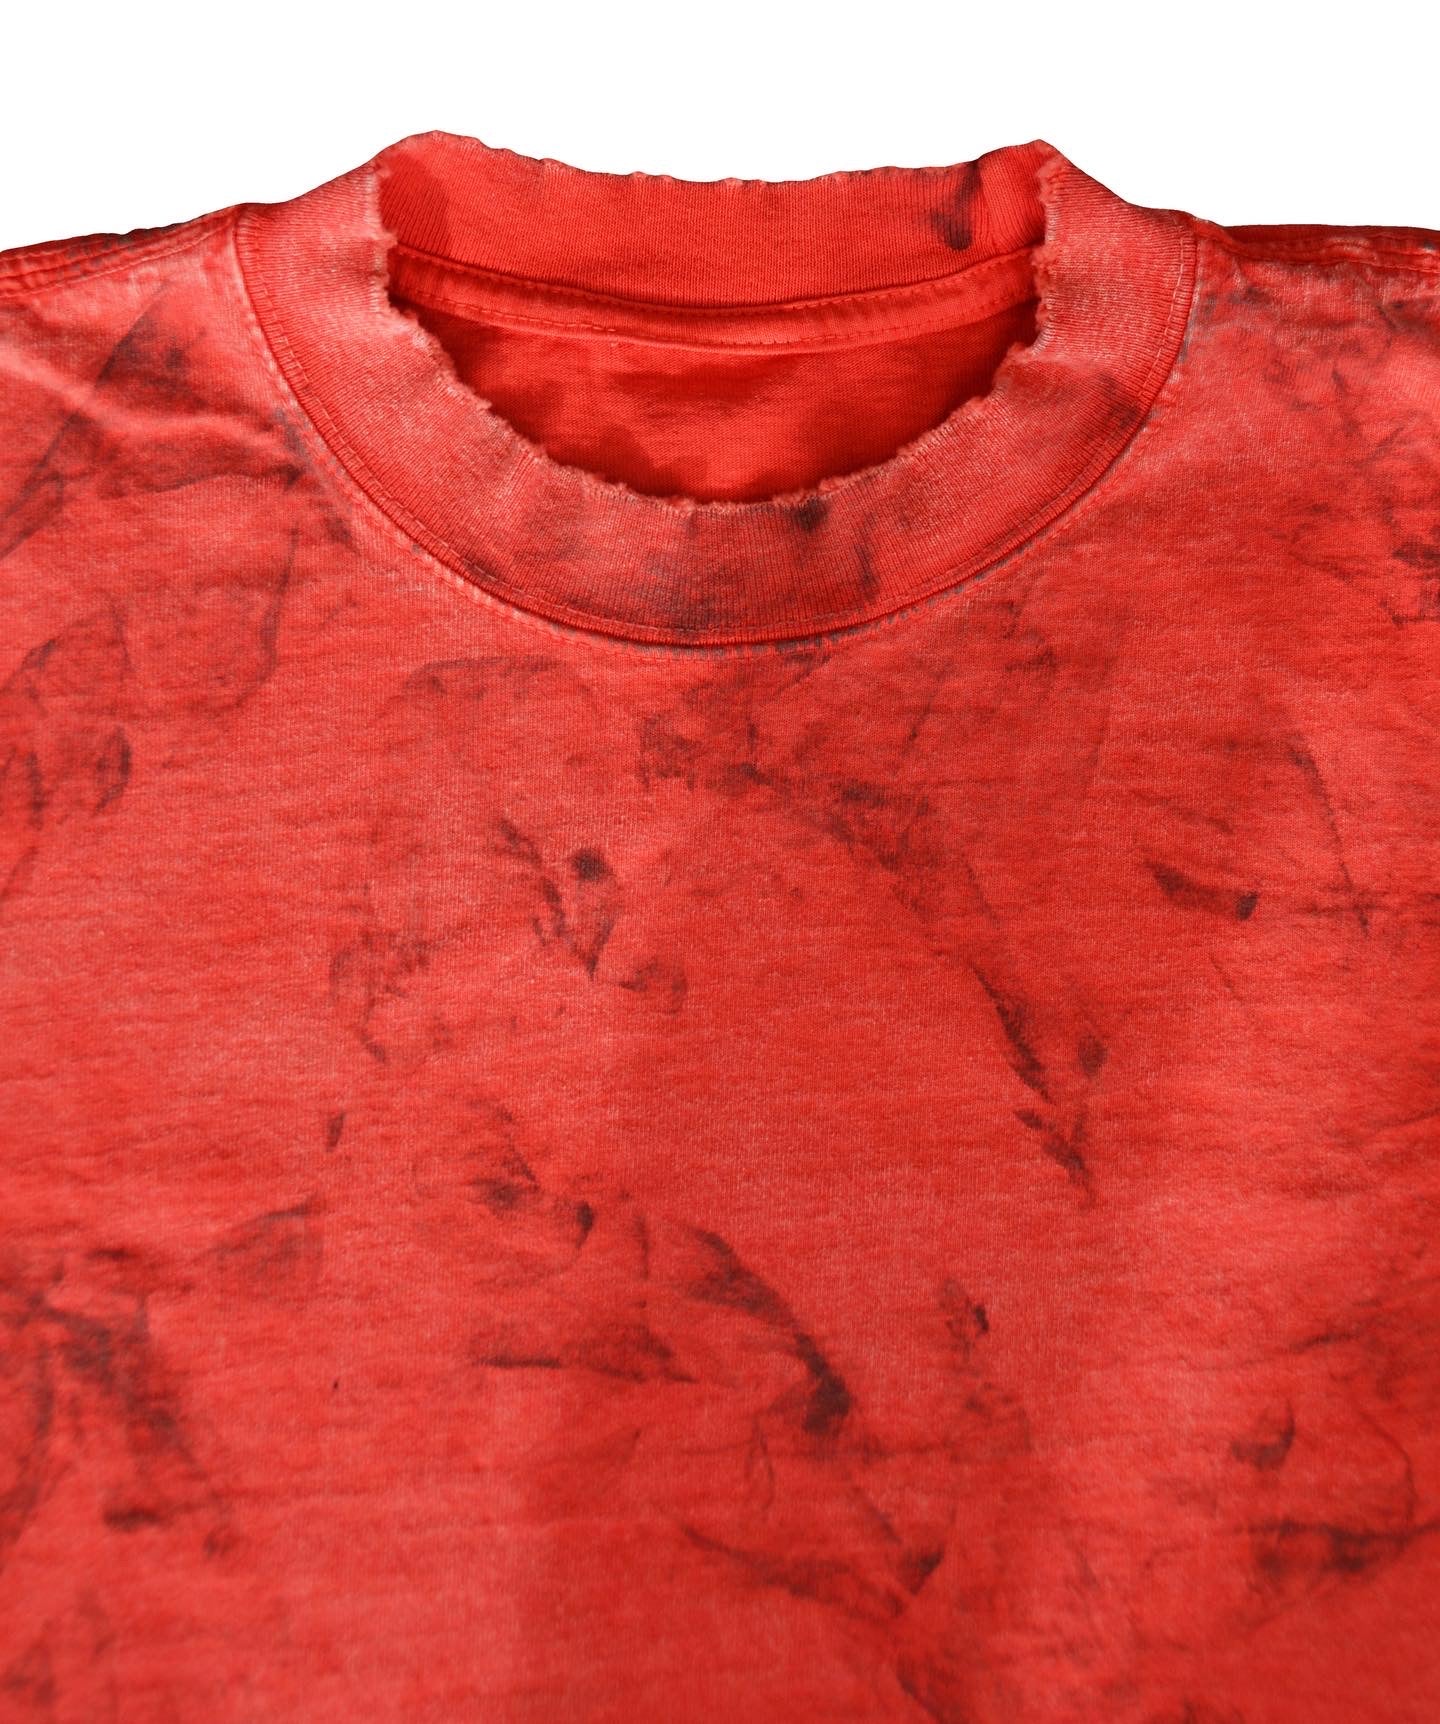 FIRE RED STAINED LONG-SLEEVE TEE